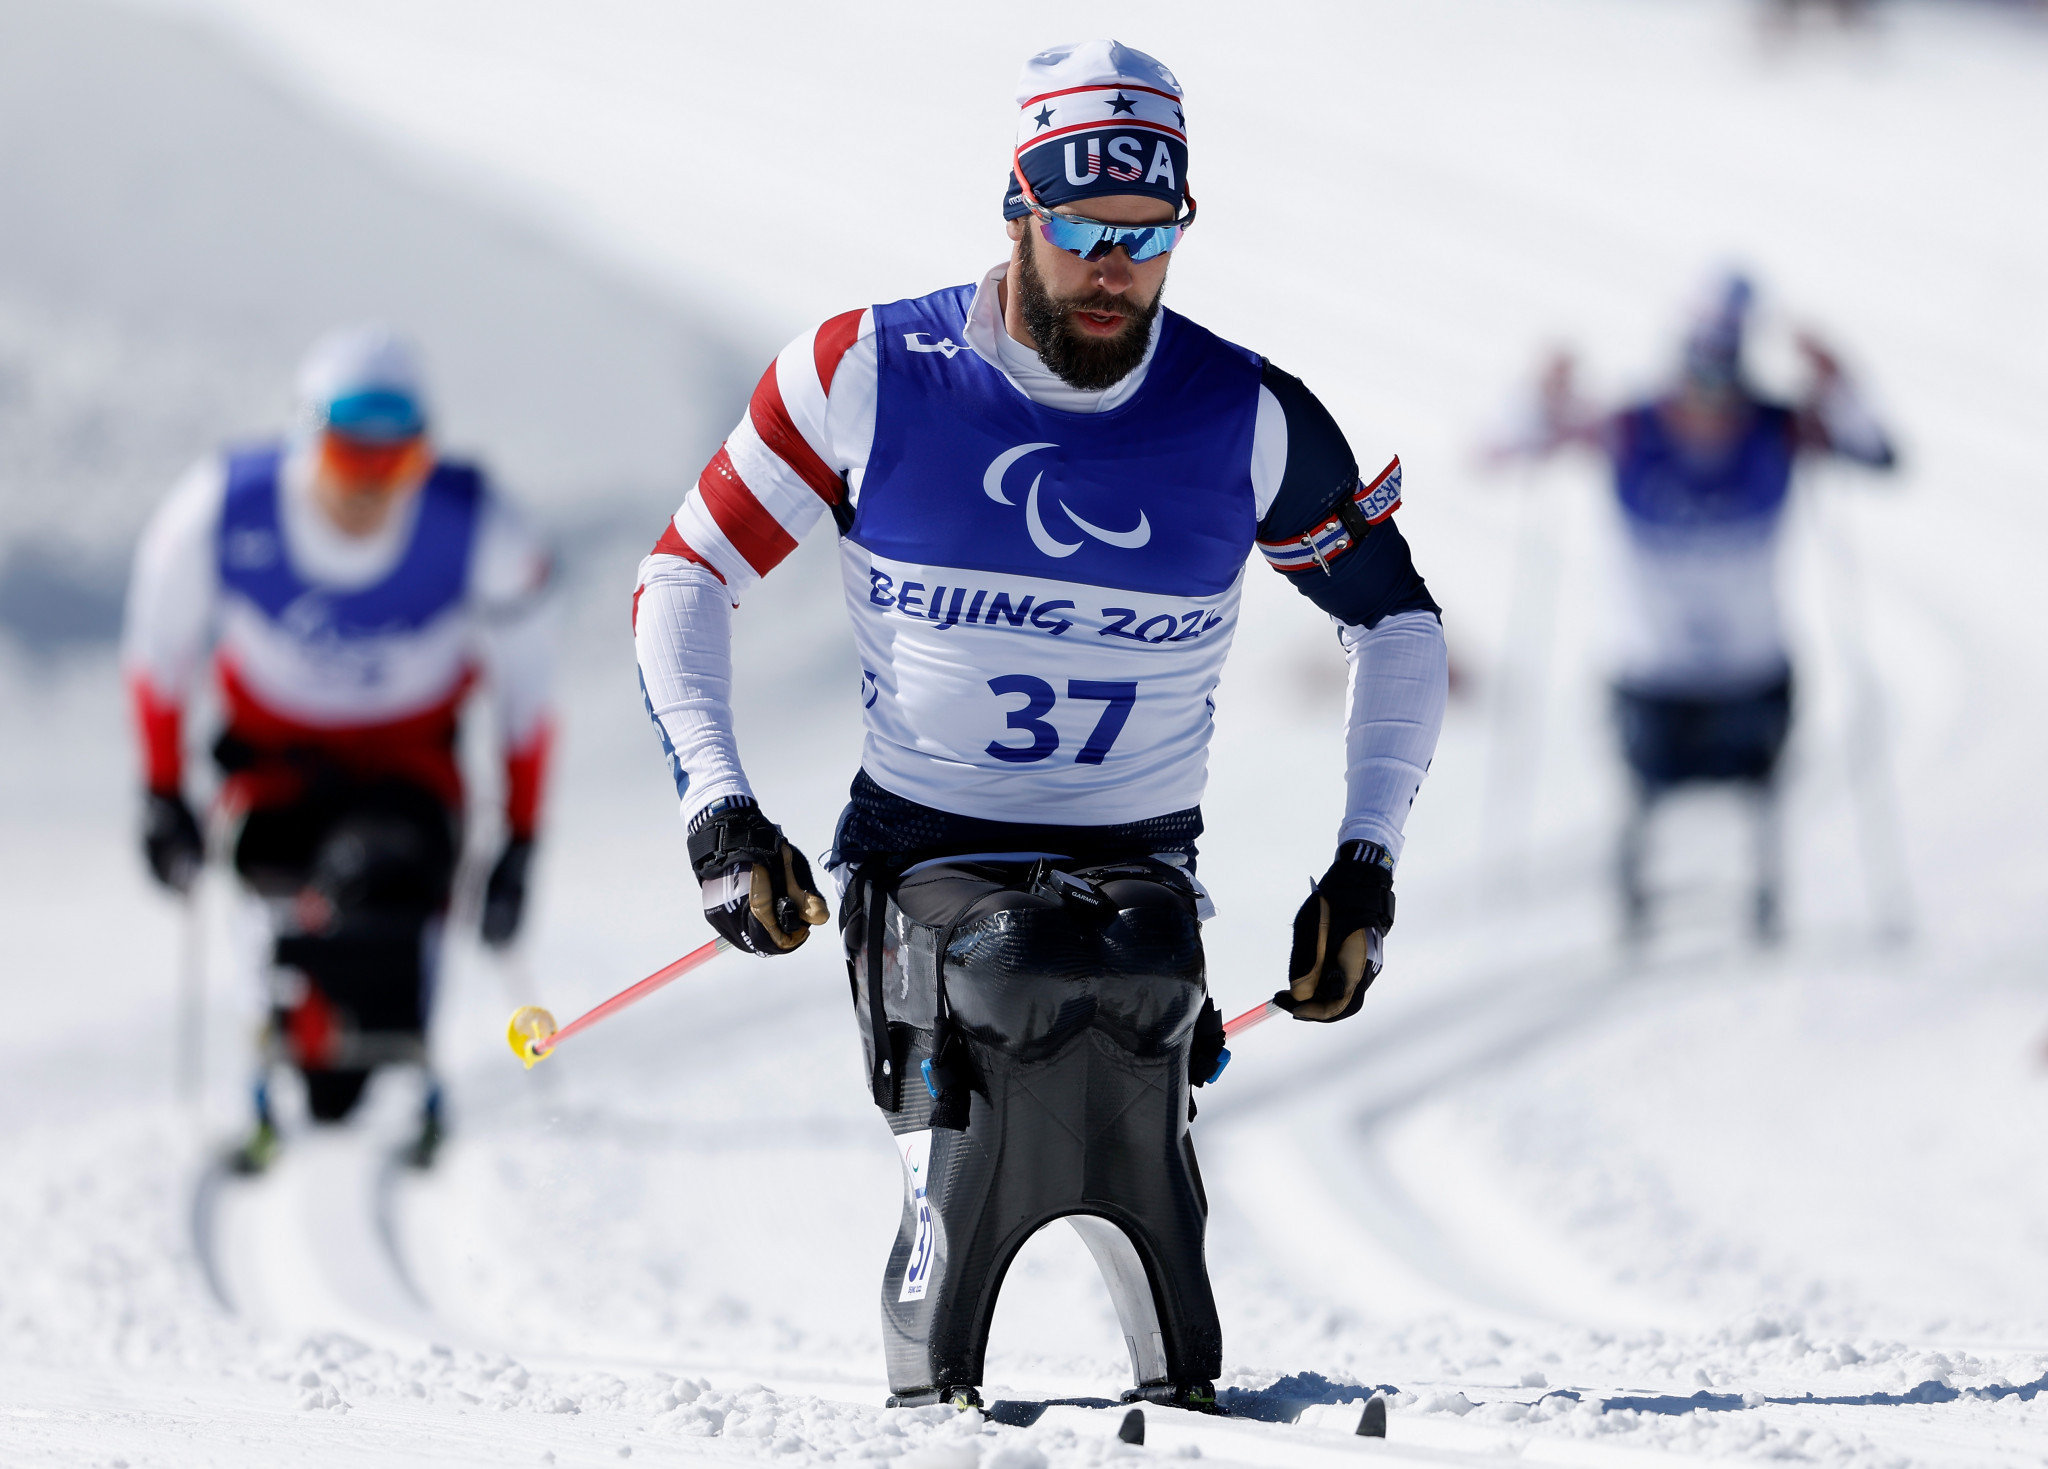 America's Aaron Pike has claimed that the rising temperatures in Beijing is making it even much harder for some competitors with restricted limb use 